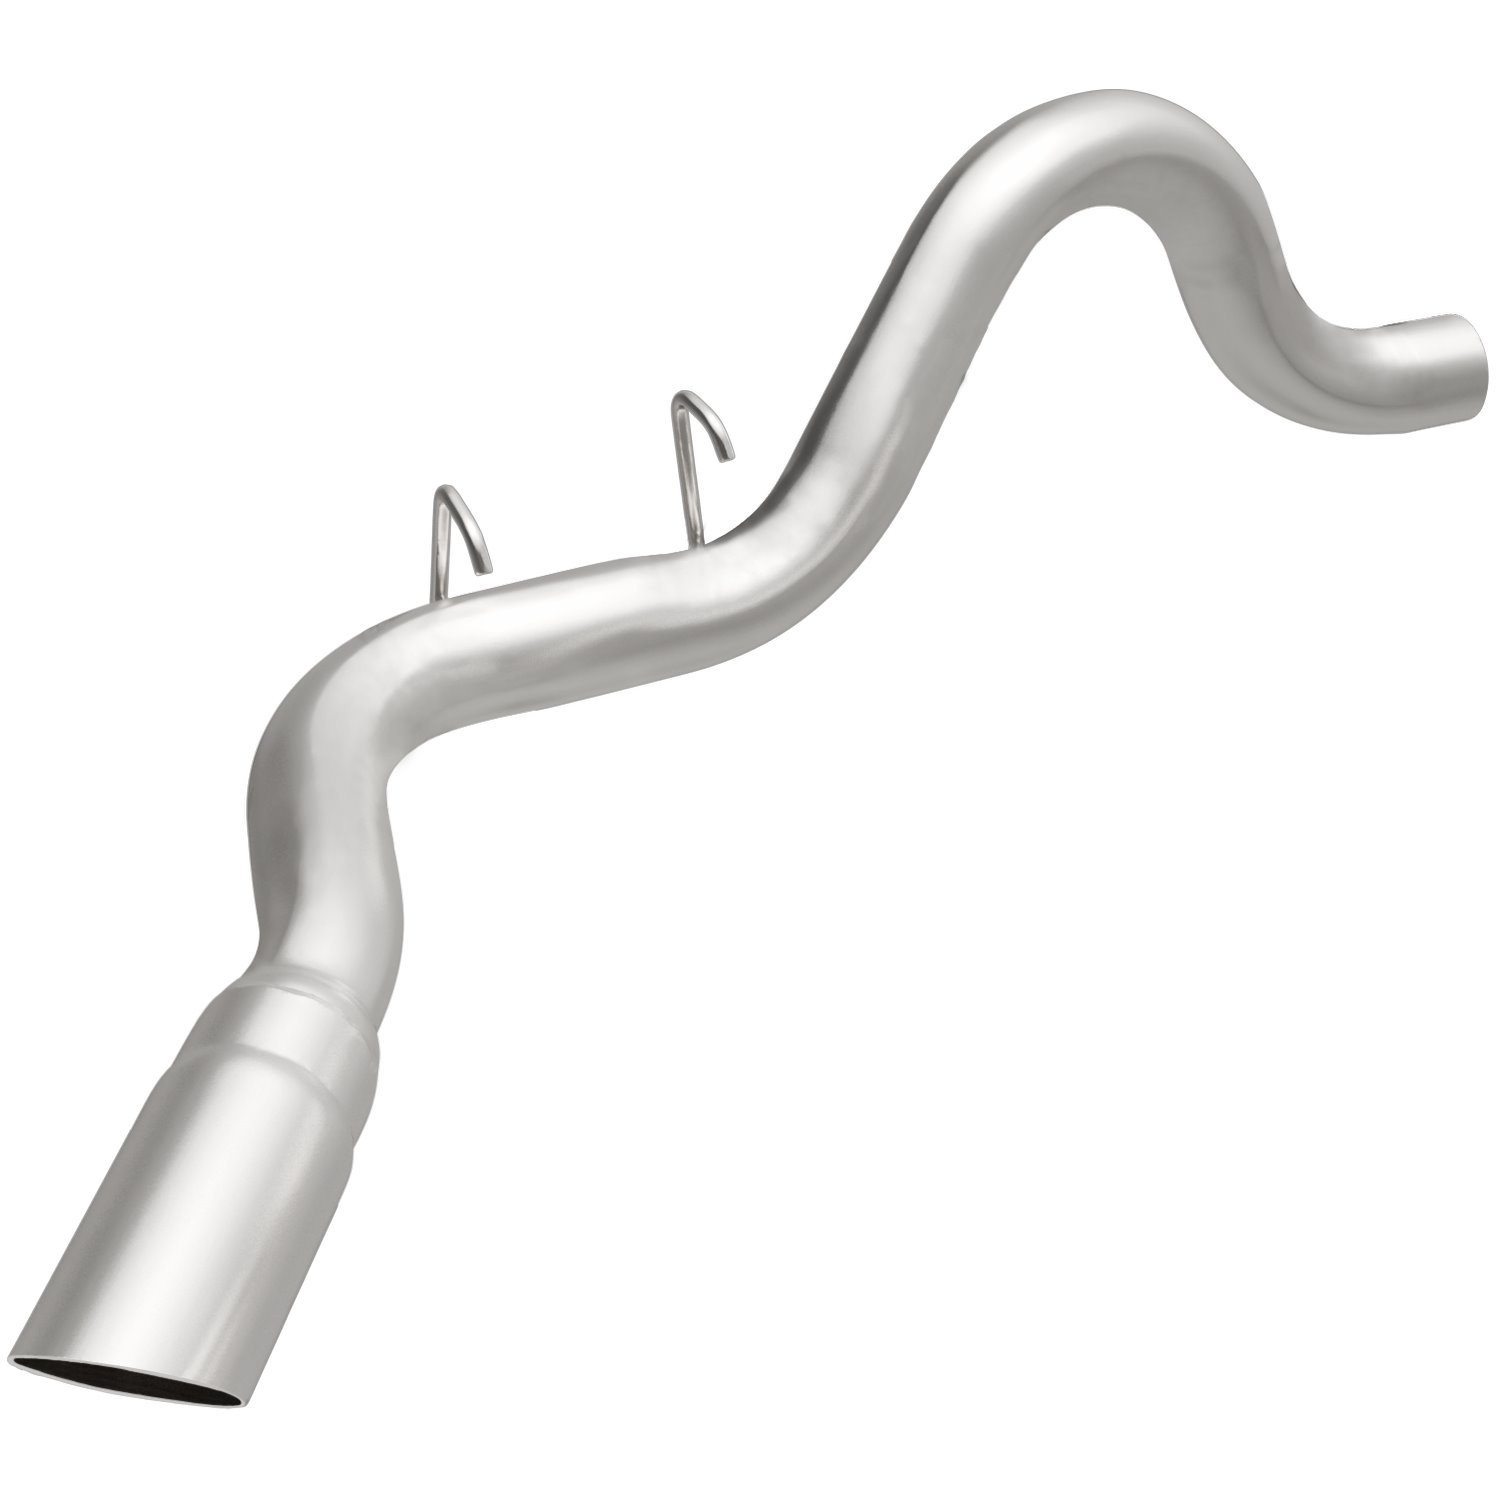 Direct-Fit Exhaust Tail Pipe, 1998-2002 Dodge Ram 2500/3500